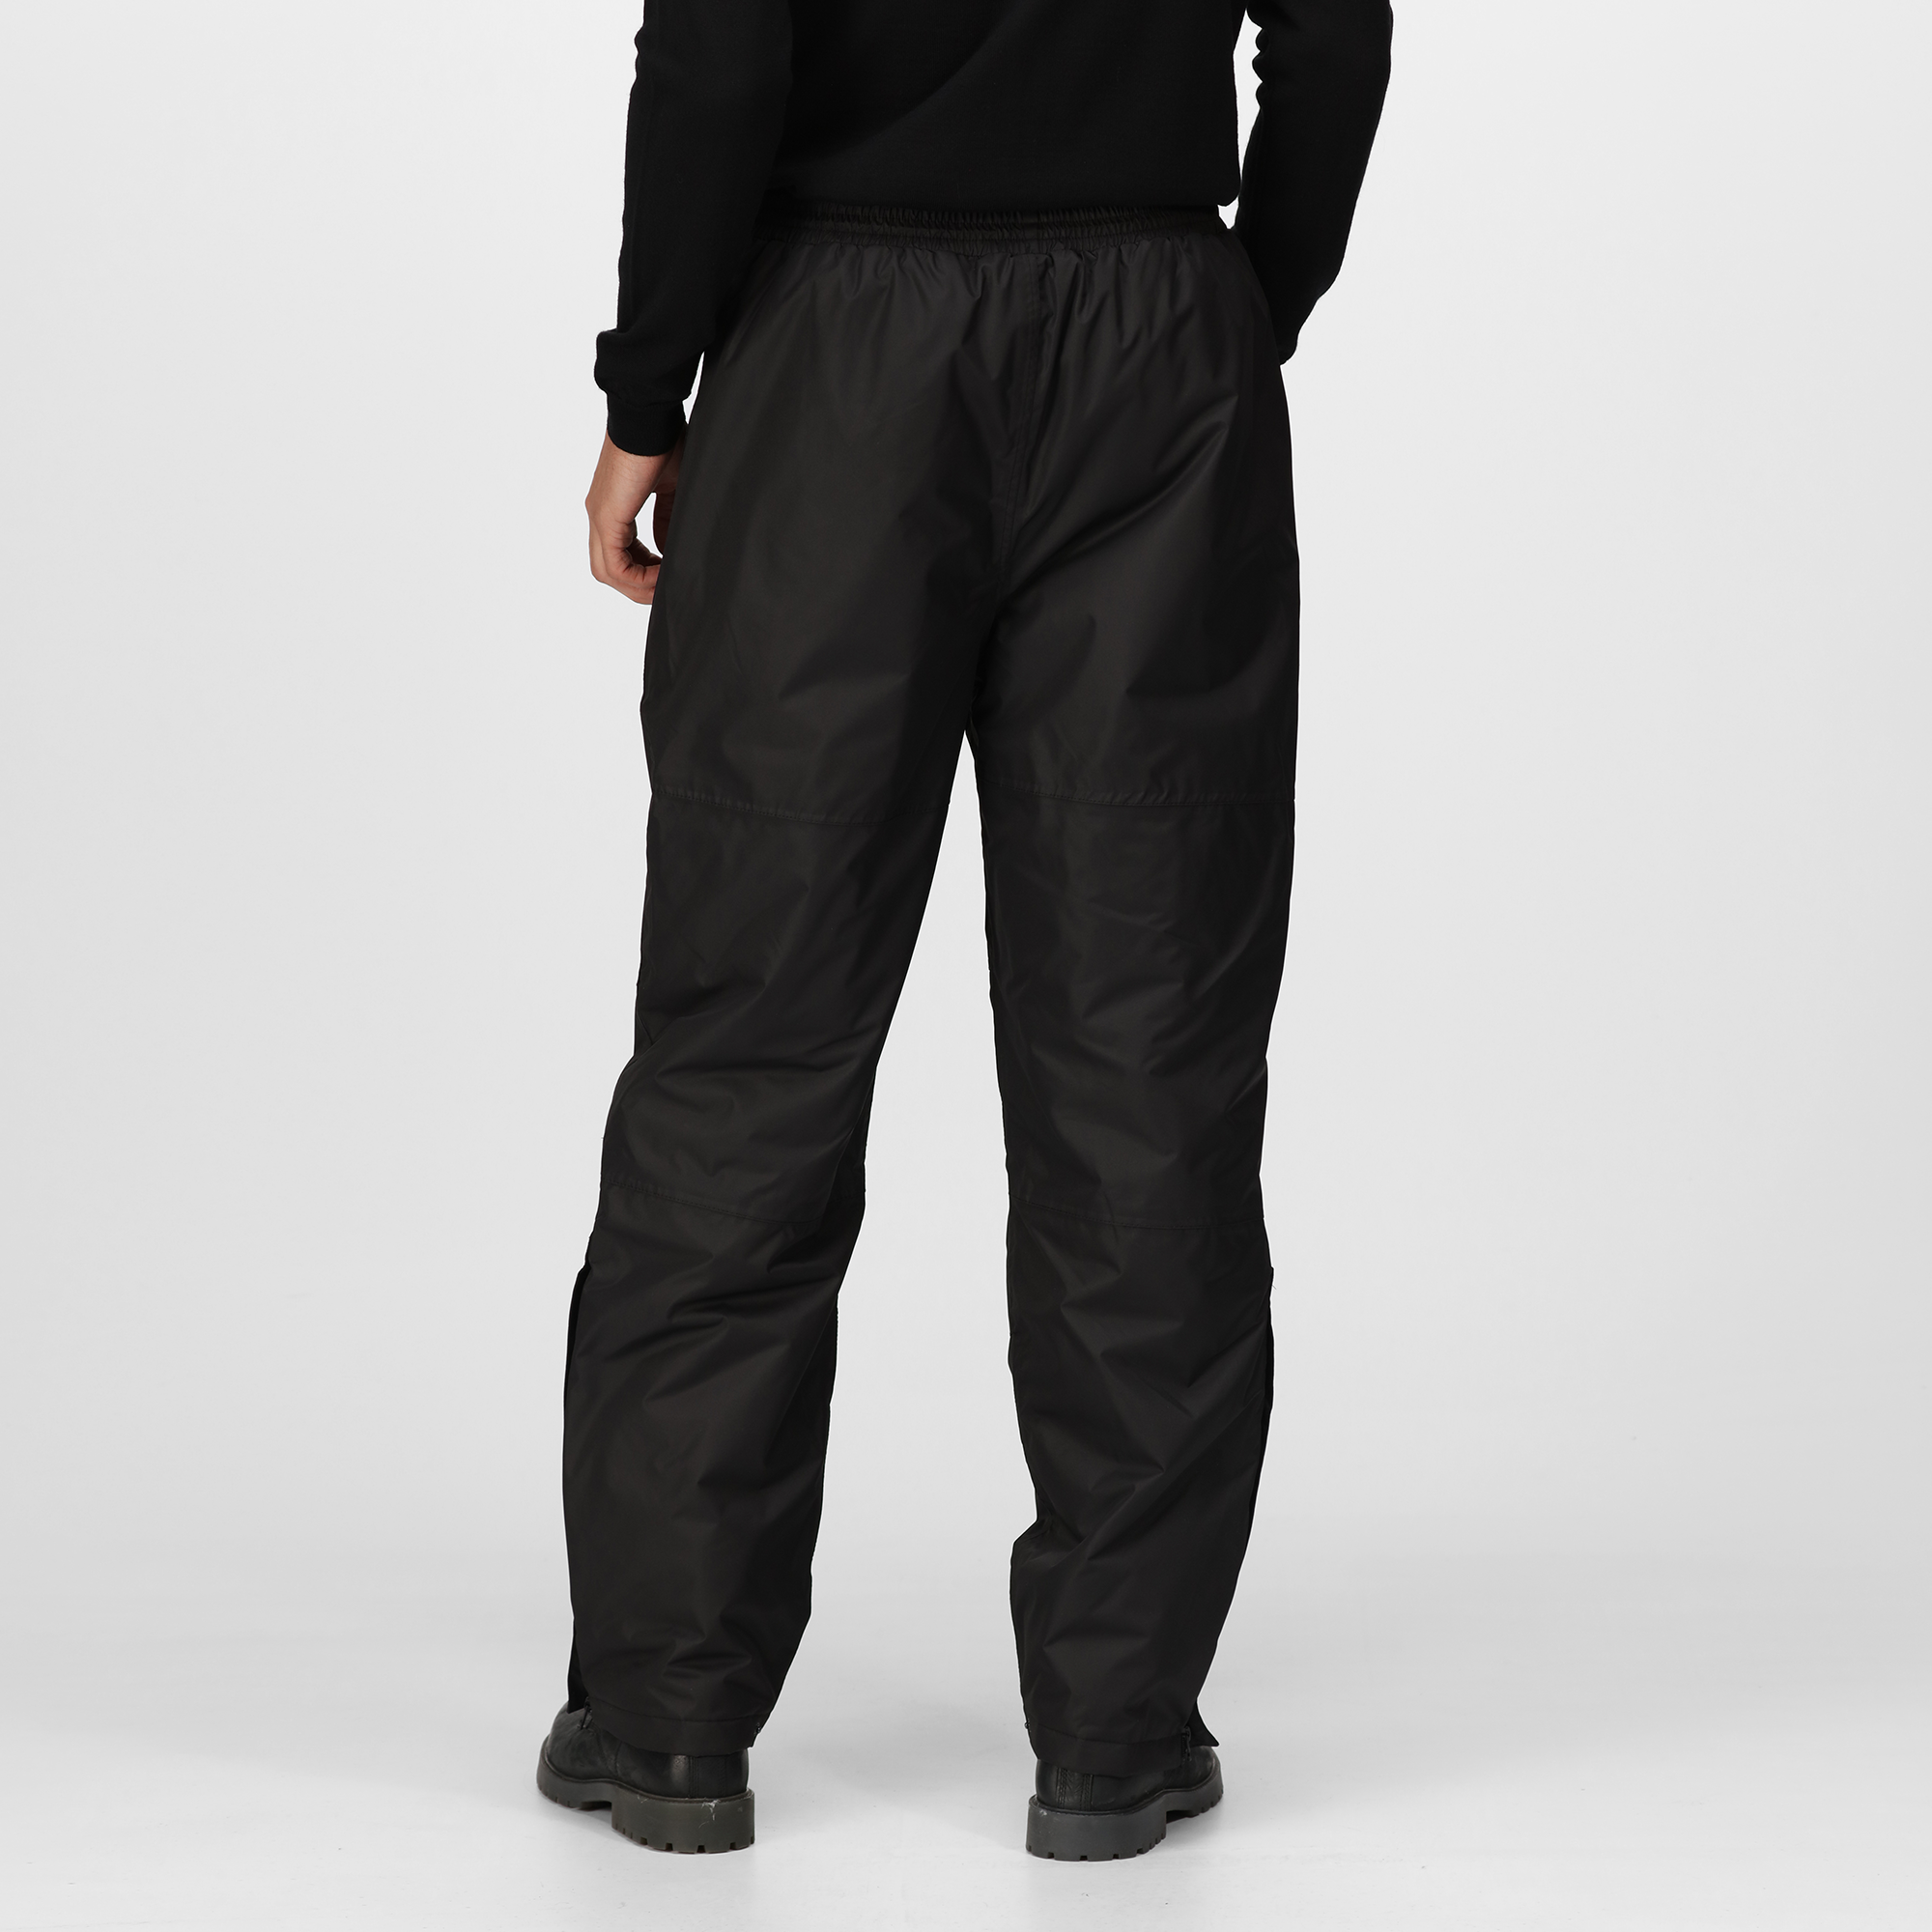 WETHERBY INSULATED BREATHABLE LINED OVERTROUSERS - Regatta Professional